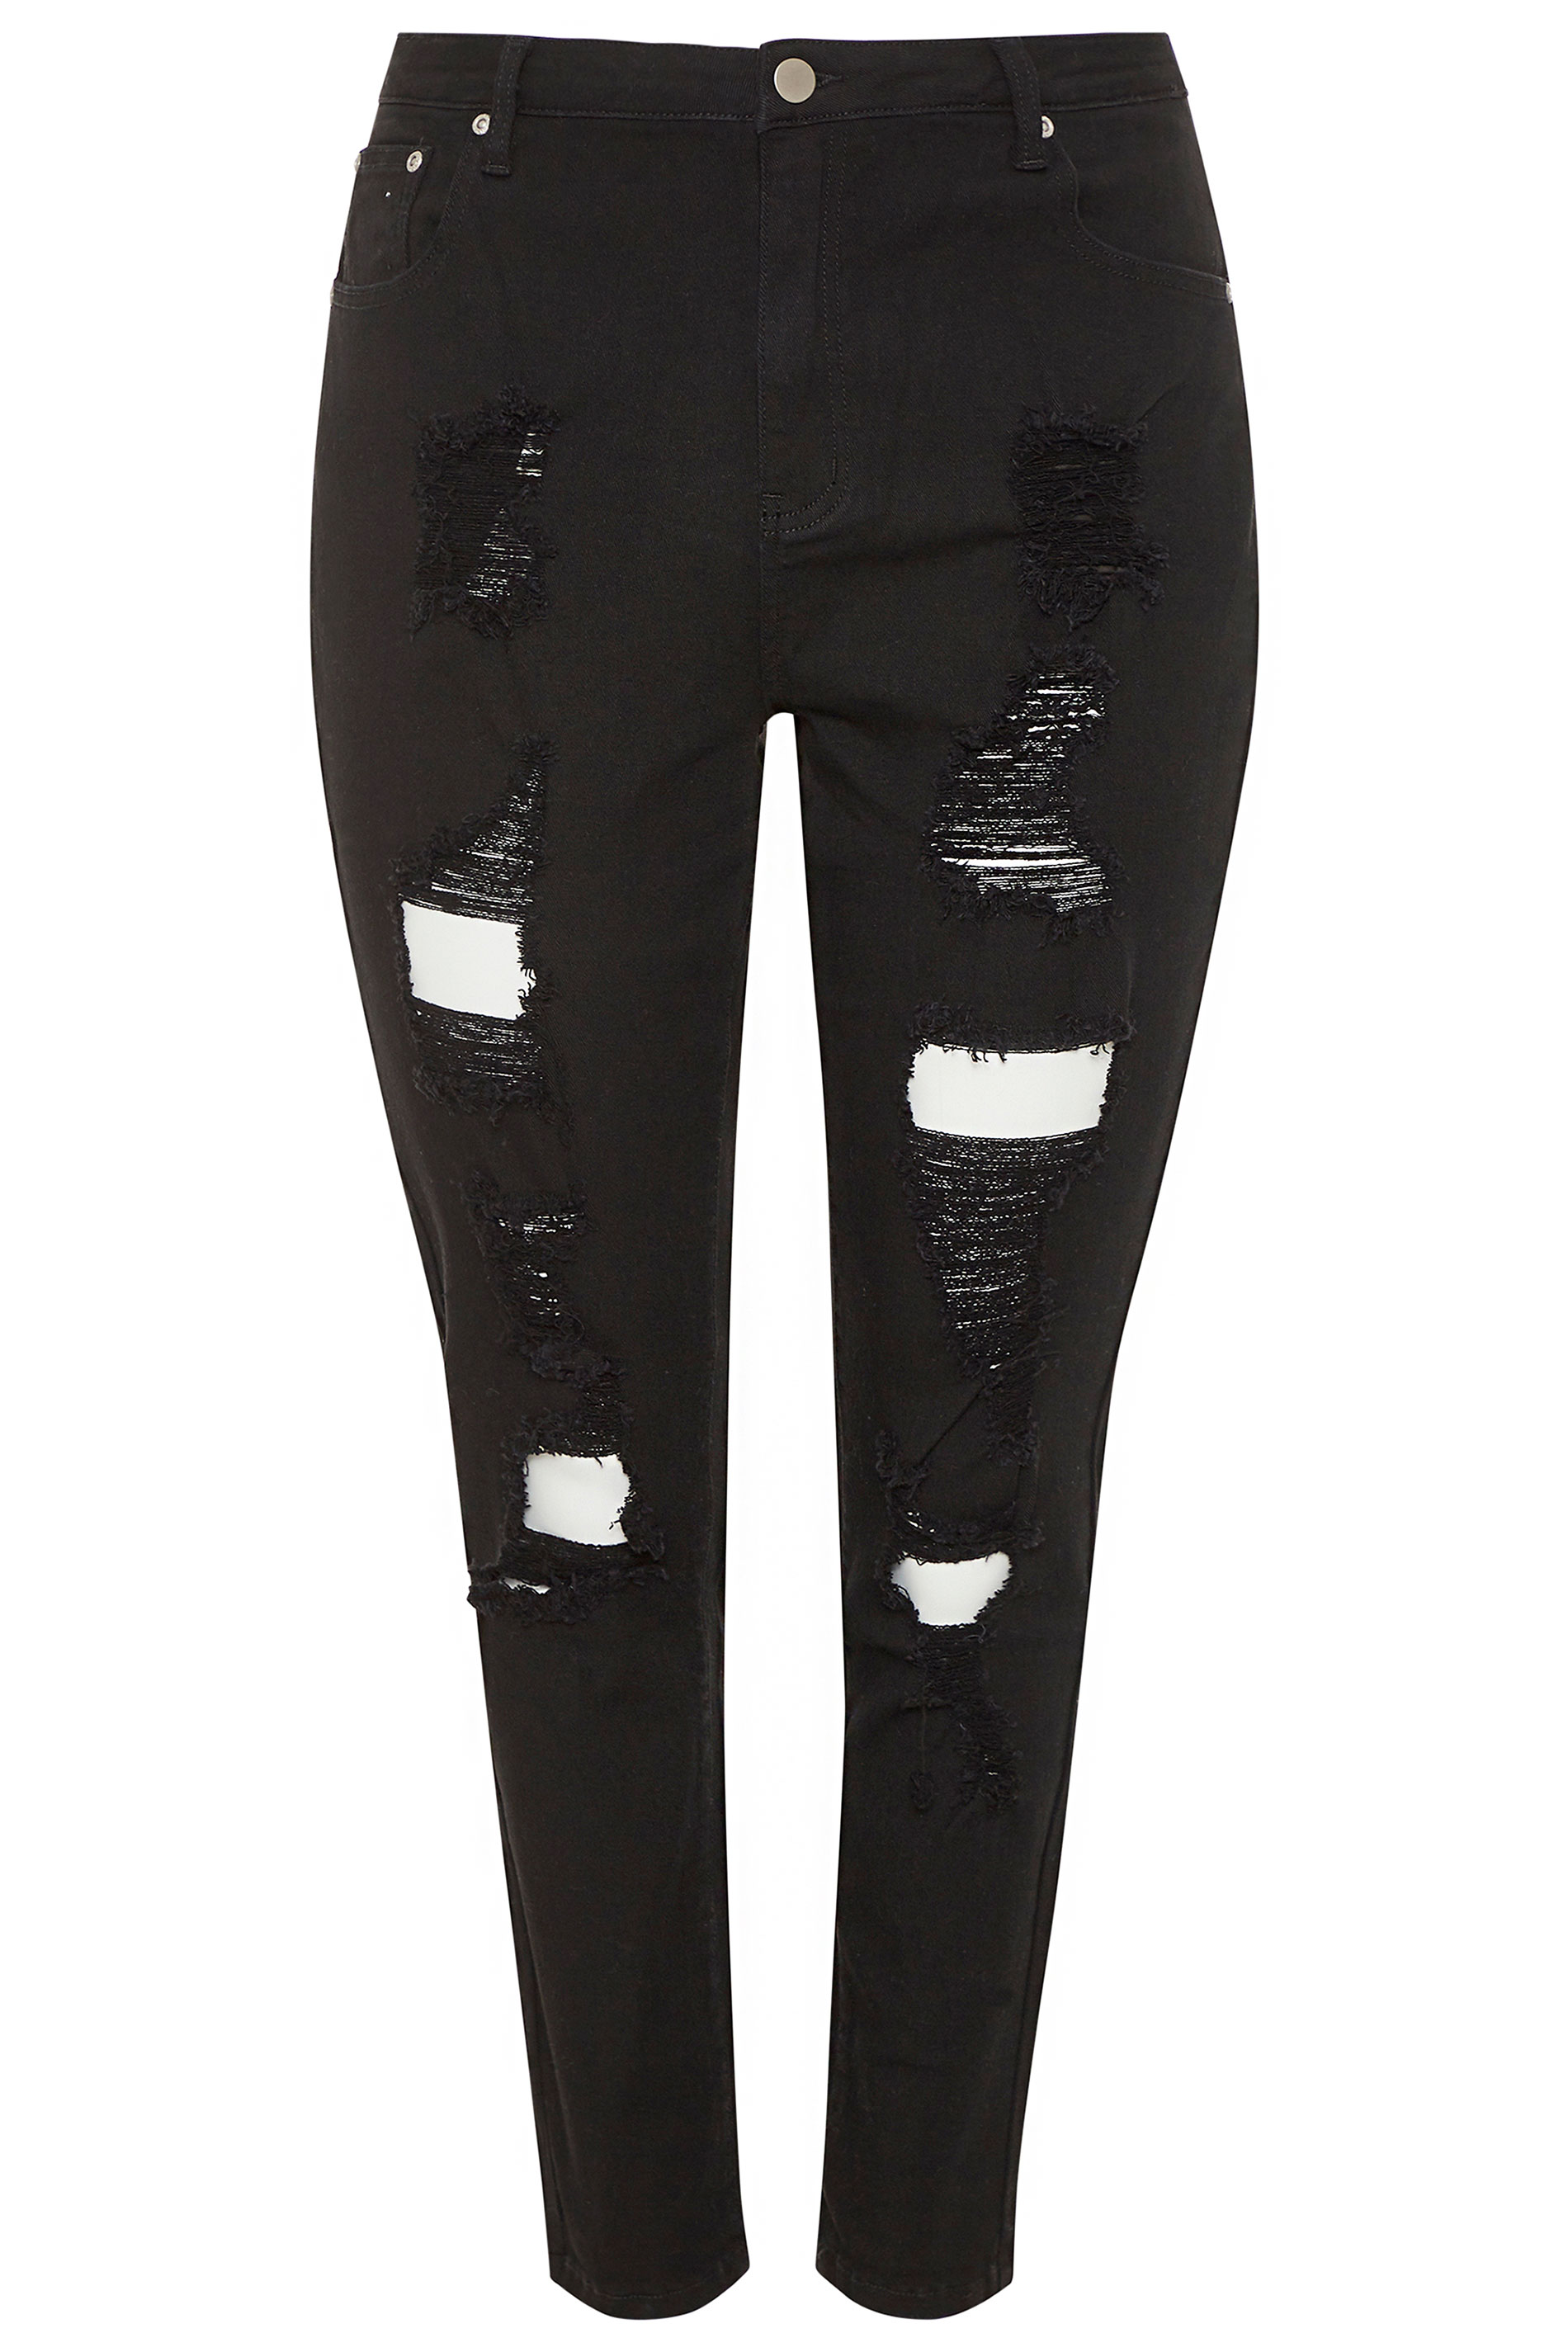 Black Distressed Ripped Skinny Jeans | Yours Clothing